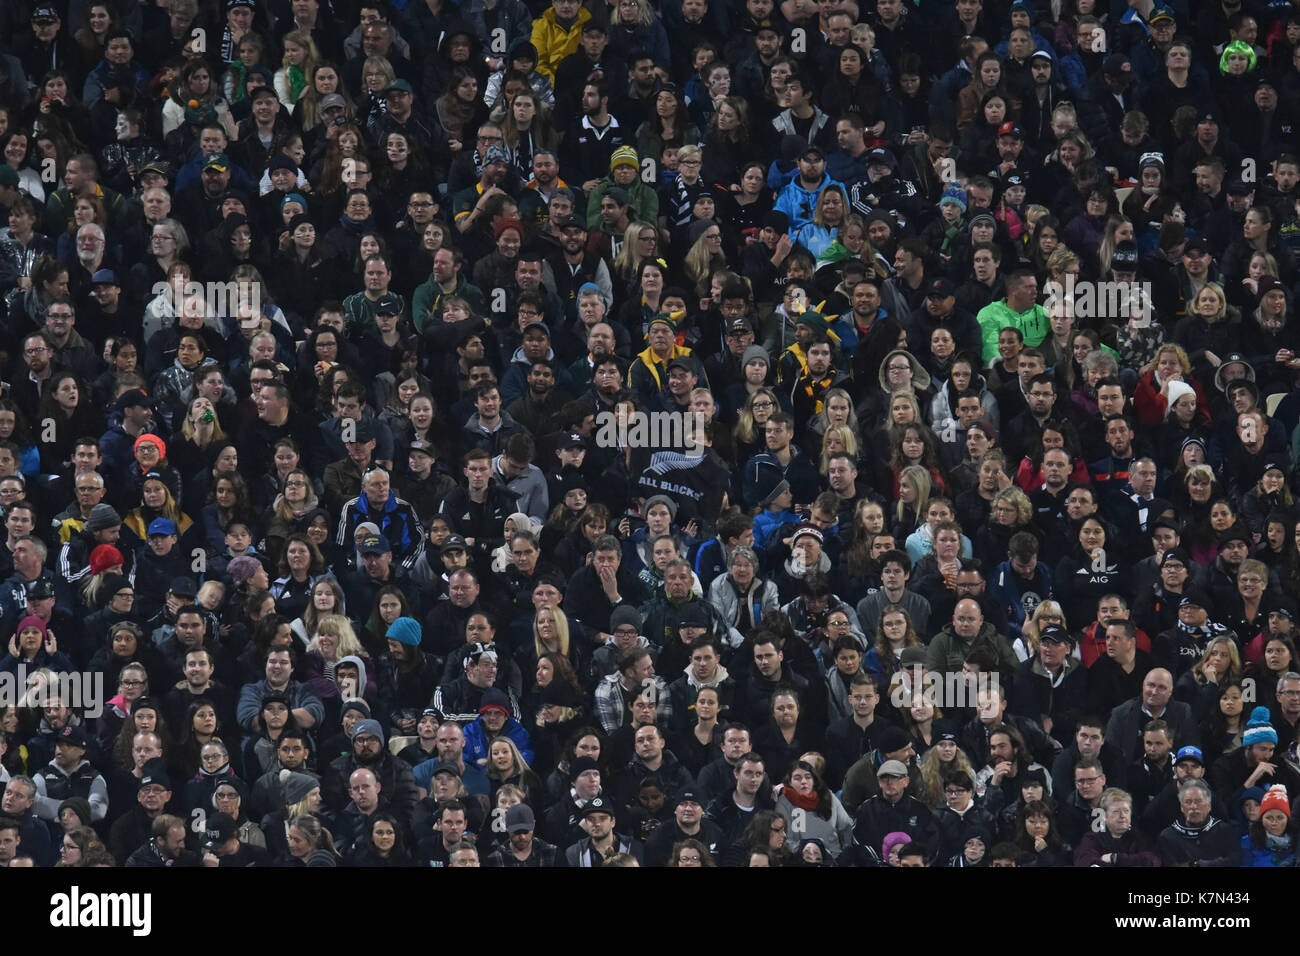 Auckland, New Zealand. 16th Sep, 2017. Huge crowds support their teams during the Rugby Championship test match between the New Zealand All Blacks and the South Africa Springboks at QBE stadium in Auckland on Sep 16, 2017. All Blacks beats Springboks 57-0. Credit: Shirley Kwok/Pacific Press/Alamy Live News Stock Photo